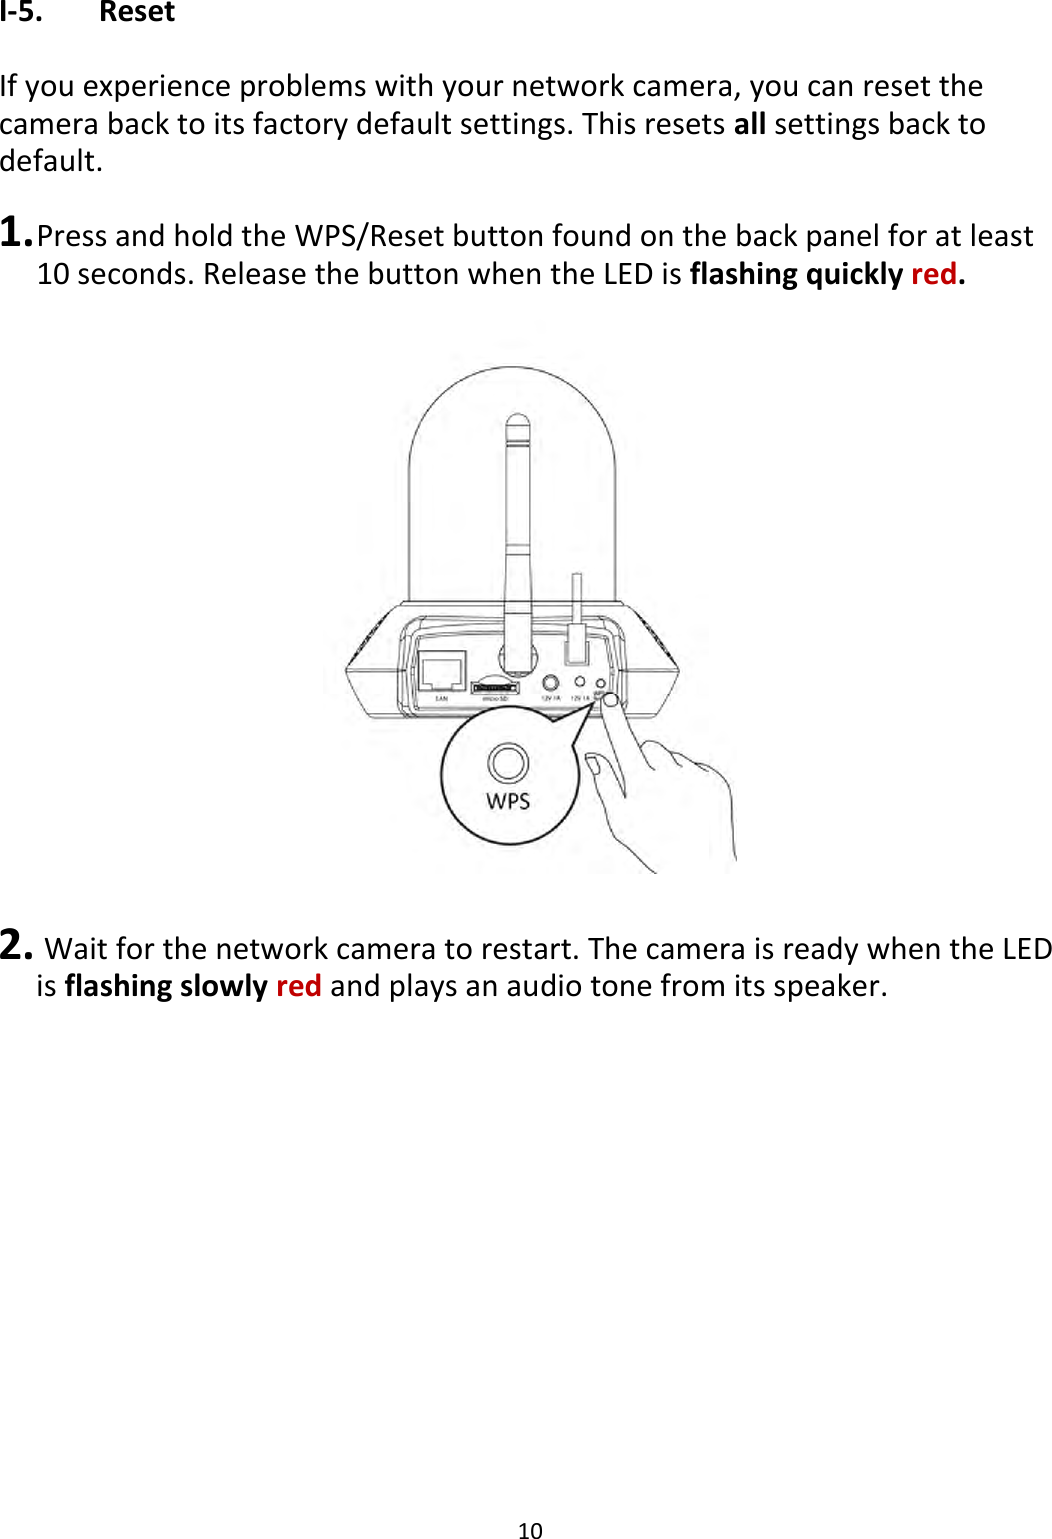 10  I-5.   Reset  If you experience problems with your network camera, you can reset the camera back to its factory default settings. This resets all settings back to default.   1. Press and hold the WPS/Reset button found on the back panel for at least 10 seconds. Release the button when the LED is flashing quickly red.   2.  Wait for the network camera to restart. The camera is ready when the LED is flashing slowly red and plays an audio tone from its speaker.  